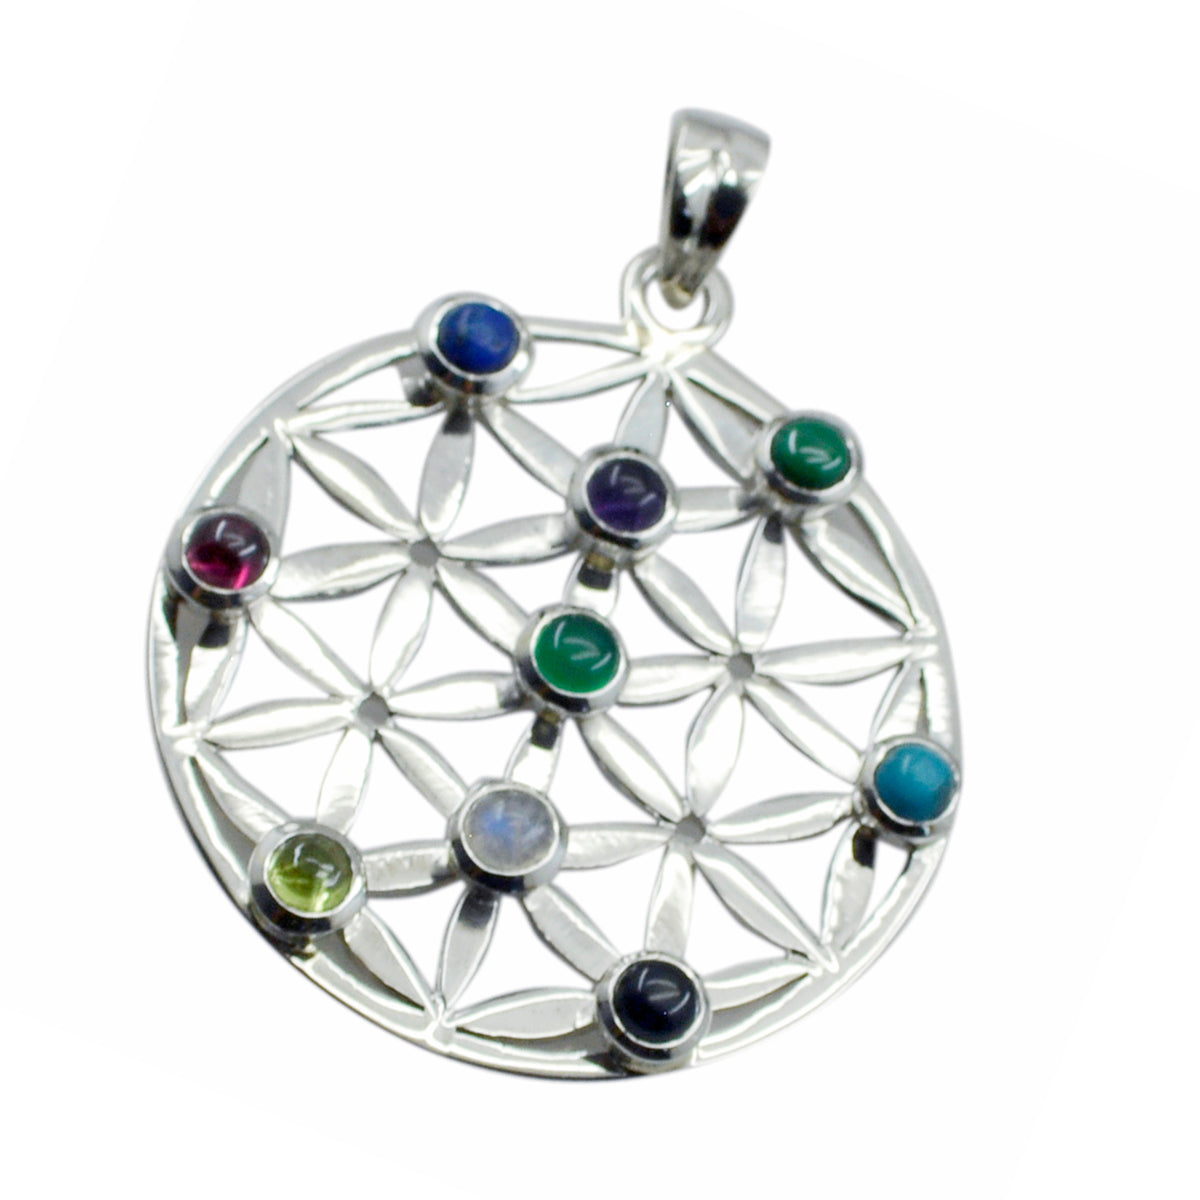 Riyo Real Gems Round Cabochon Multi Color Multi Stone Solid Silver Pendant Gift For Wedding